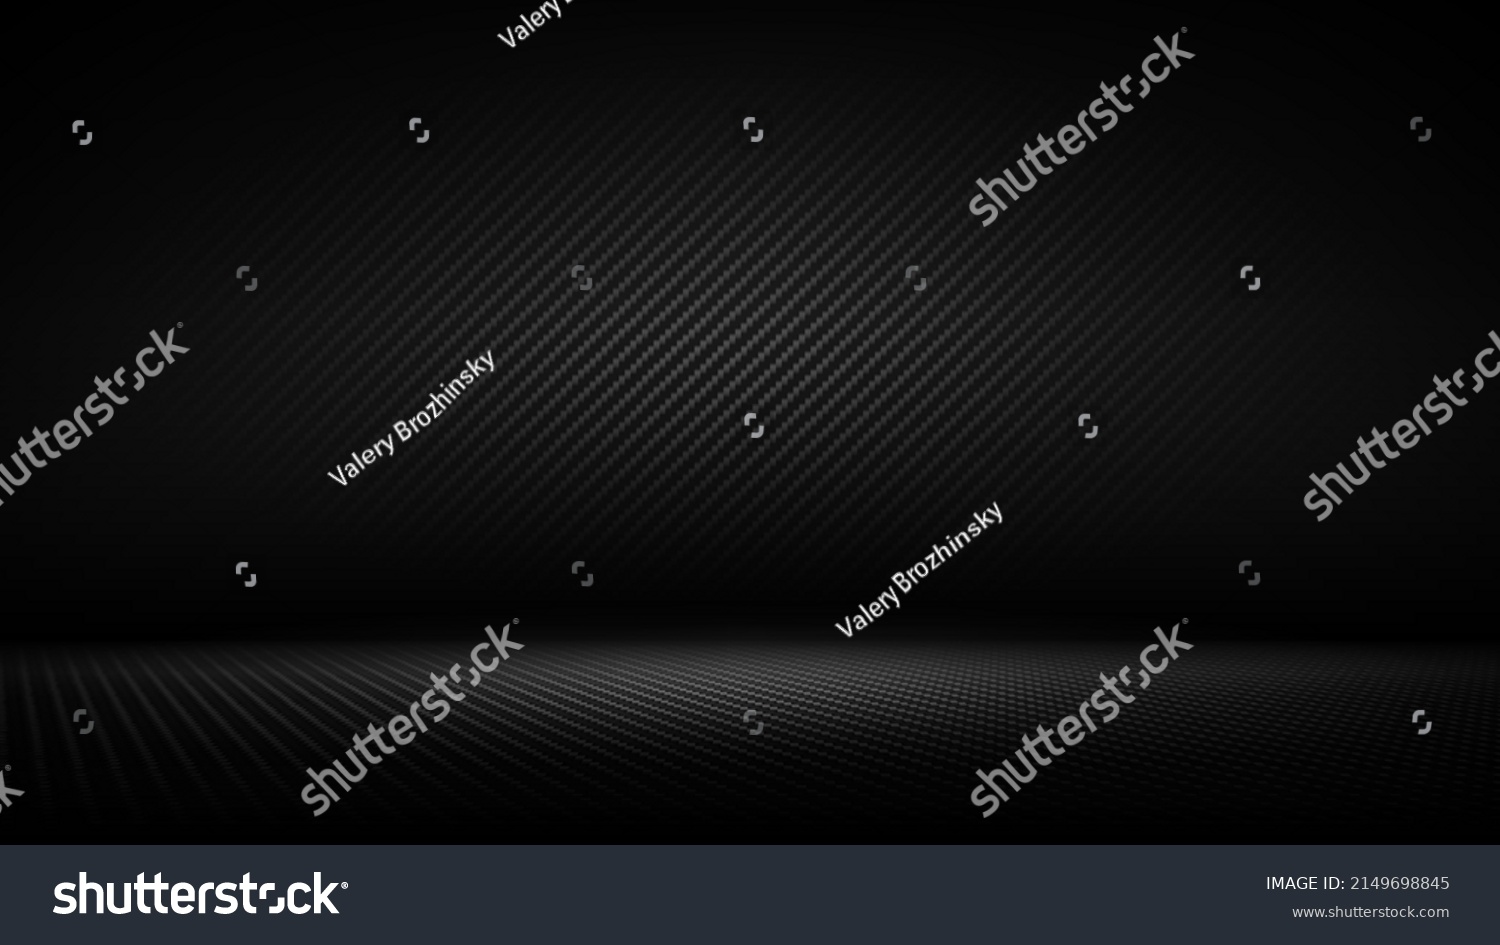 SVG of Studio interior with carbon fiber texture. Modern carbon fiber textured black interior with light. Background for mounting, product placement. Vector background, template, mockup svg